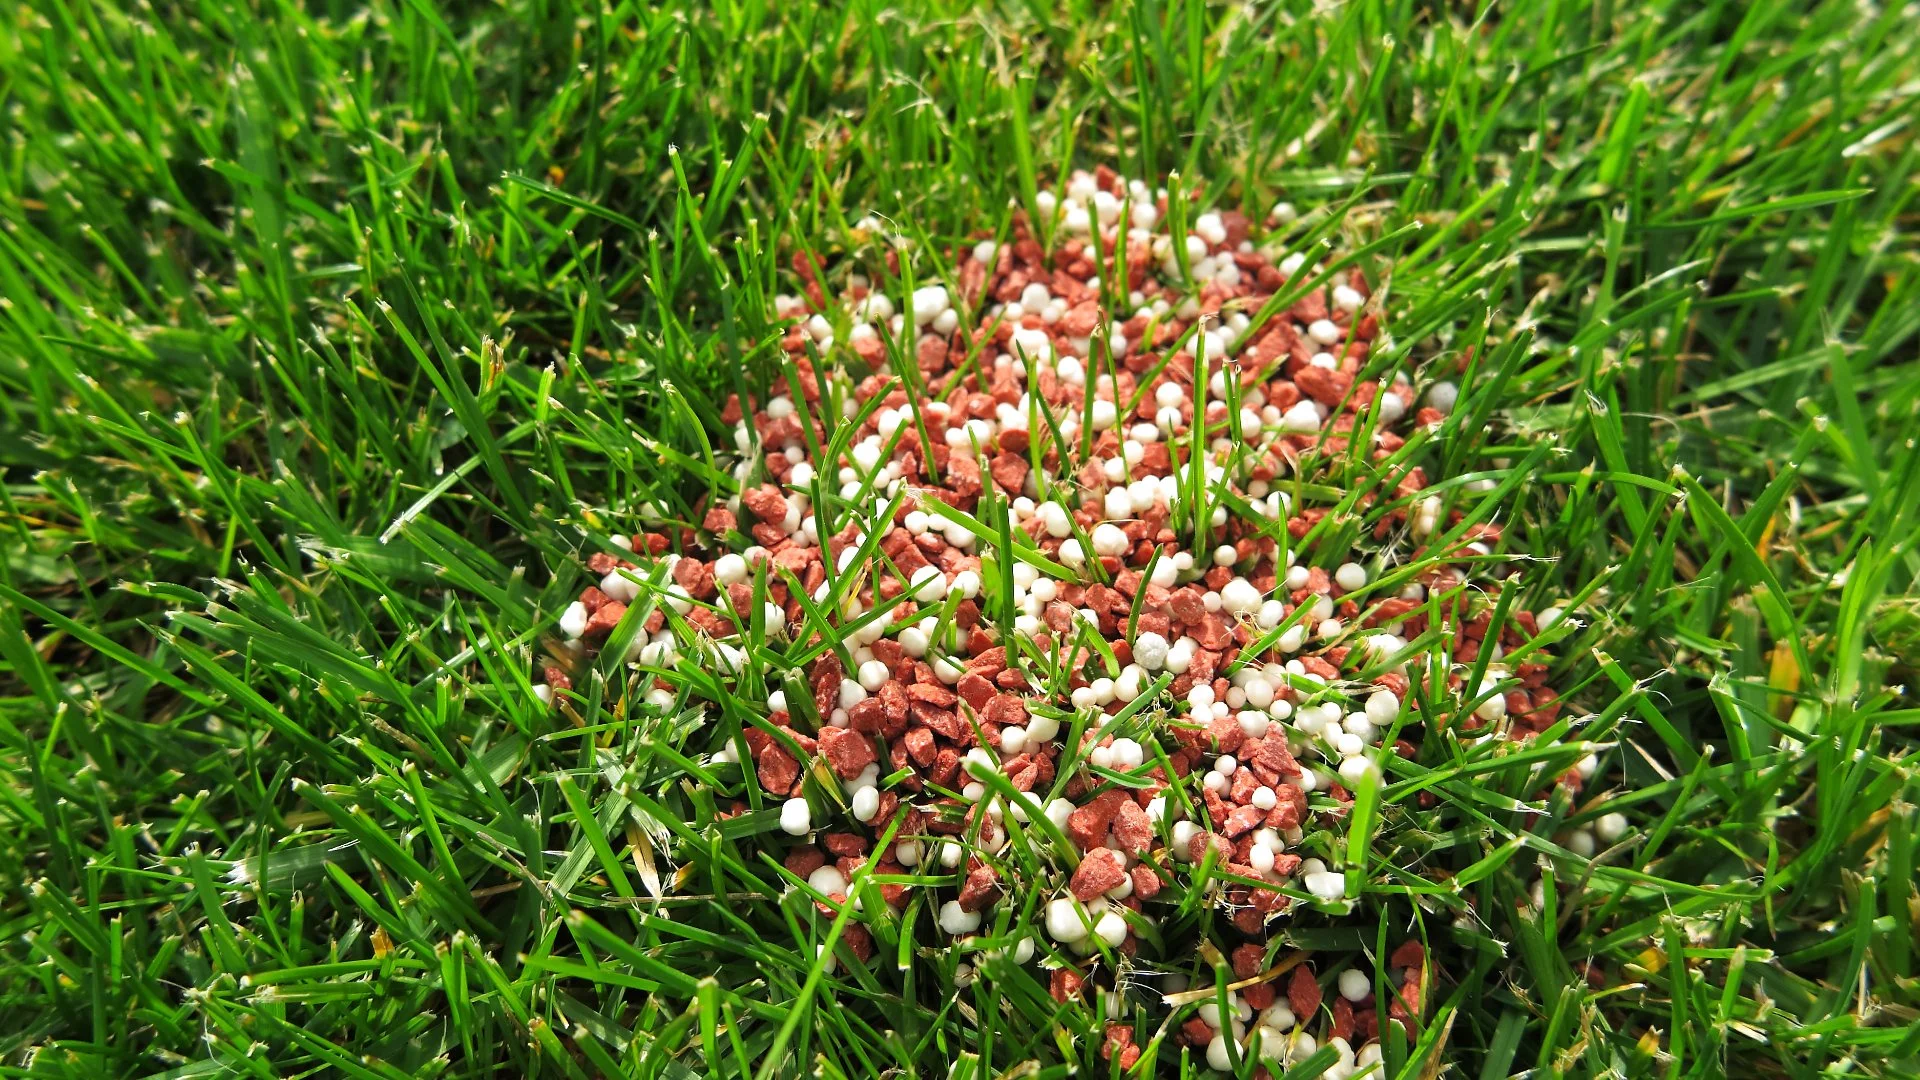 How Many Times Should My Lawn Be Fertilized During the Fall Season?